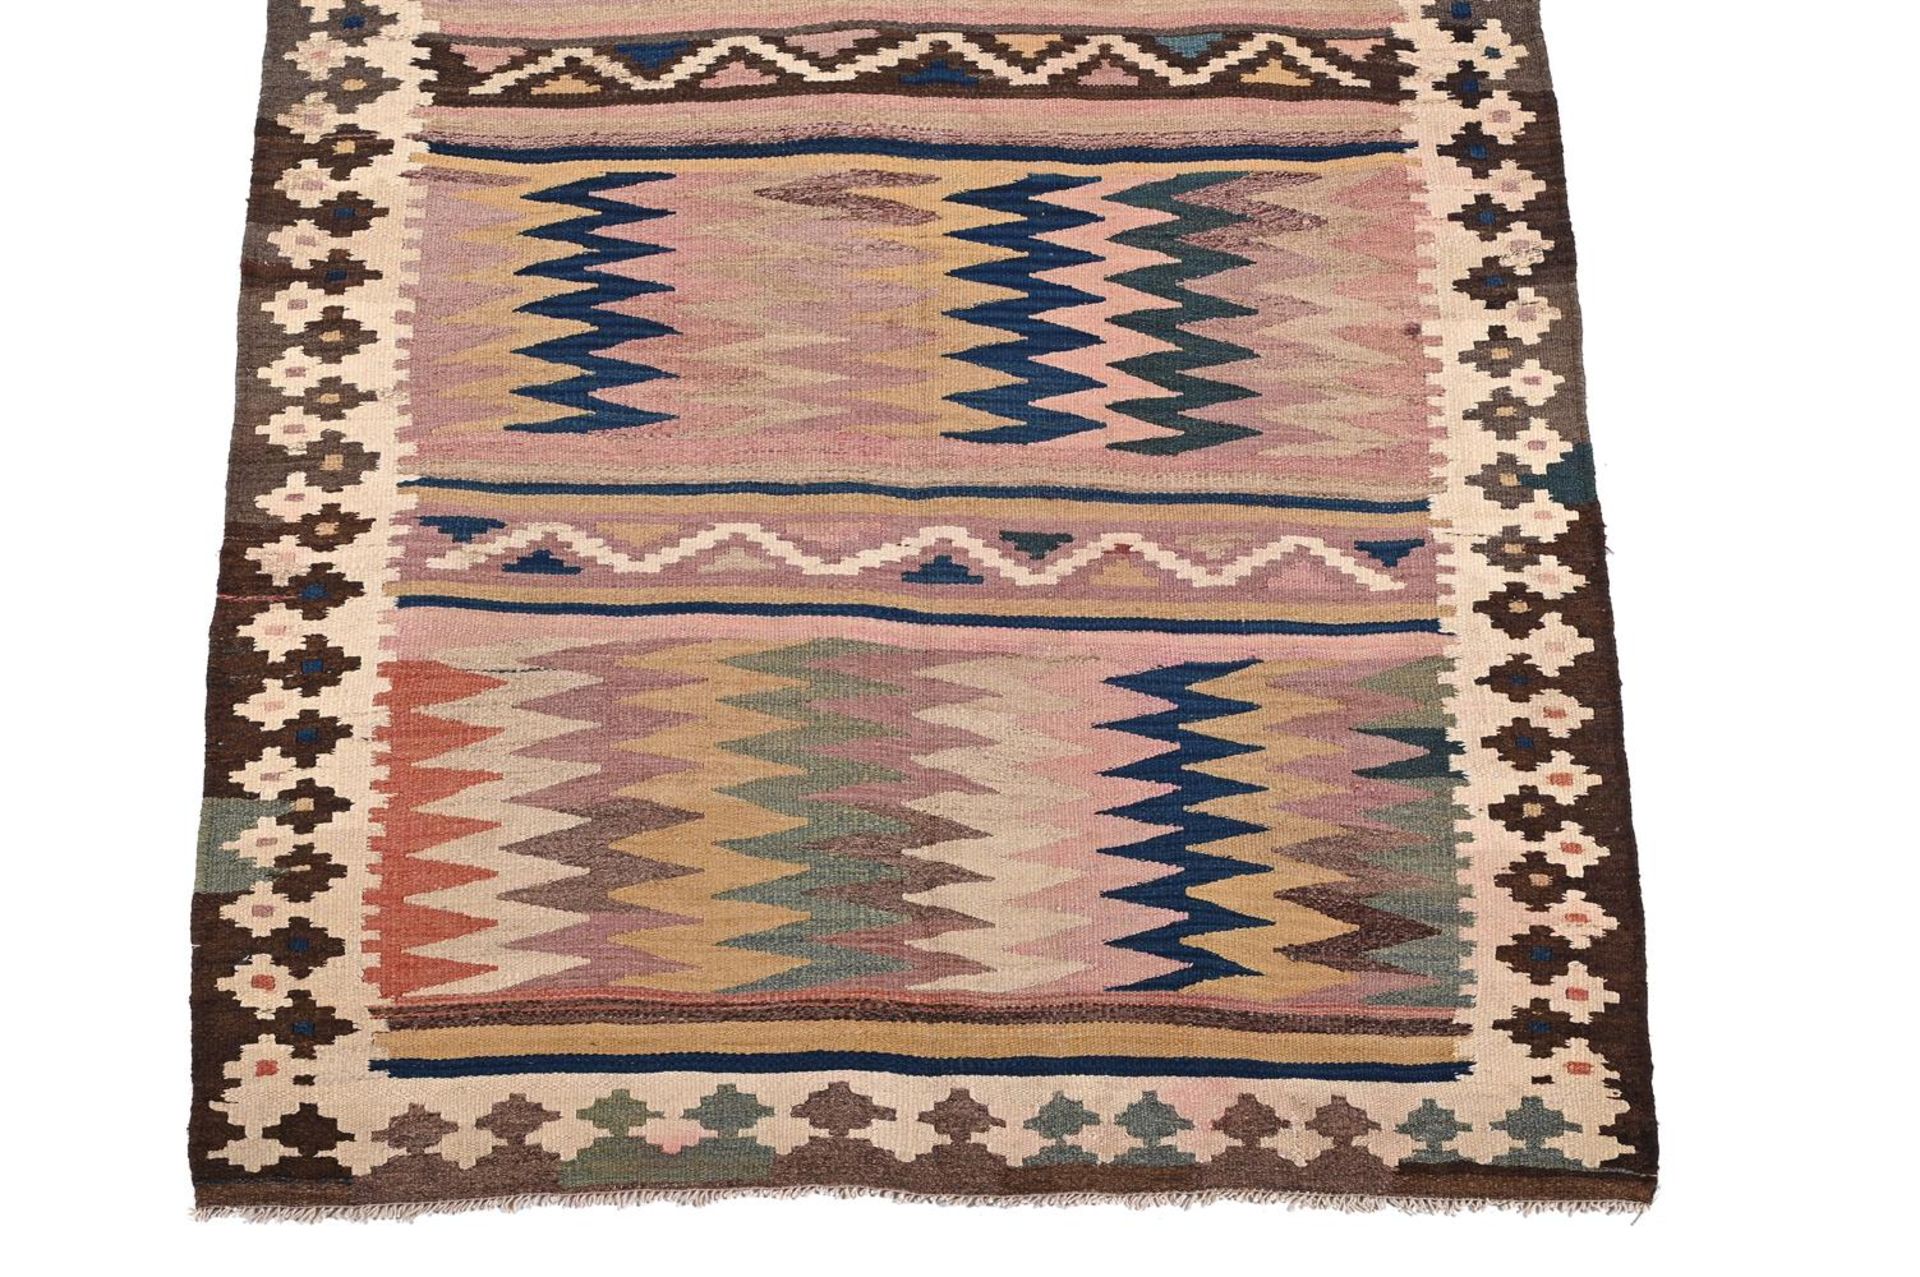 A NORTH WEST PERSIAN KILIM RUNNER, approximately 121 x 38cm - Image 2 of 2